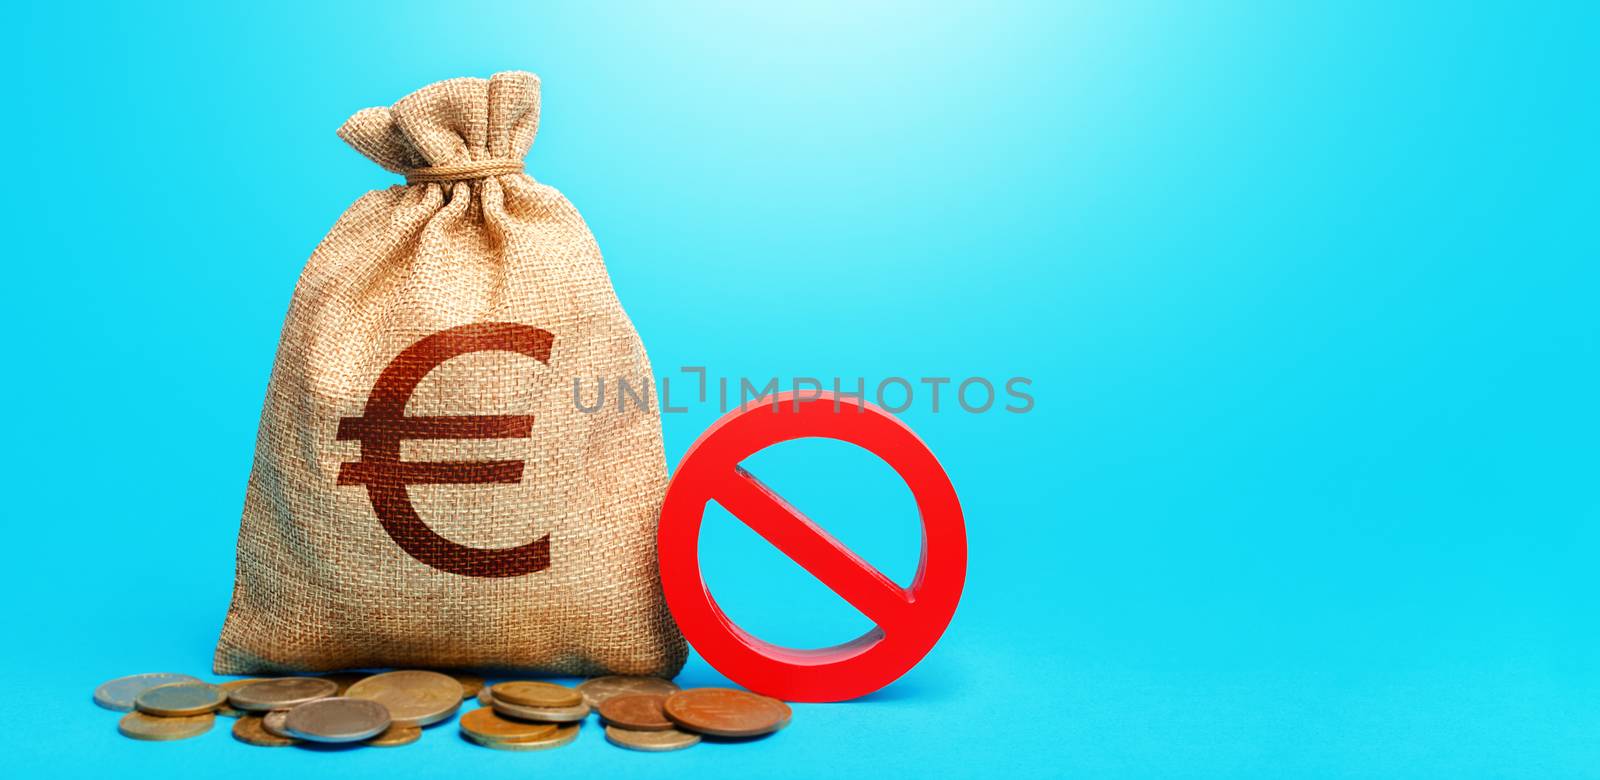 Euro money bag and red prohibition sign NO. Forced withdrawal of deposits. Monetary restrictions, freezing seizure of bank accounts. Termination funding for projects. Monitoring suspicious money flows by iLixe48